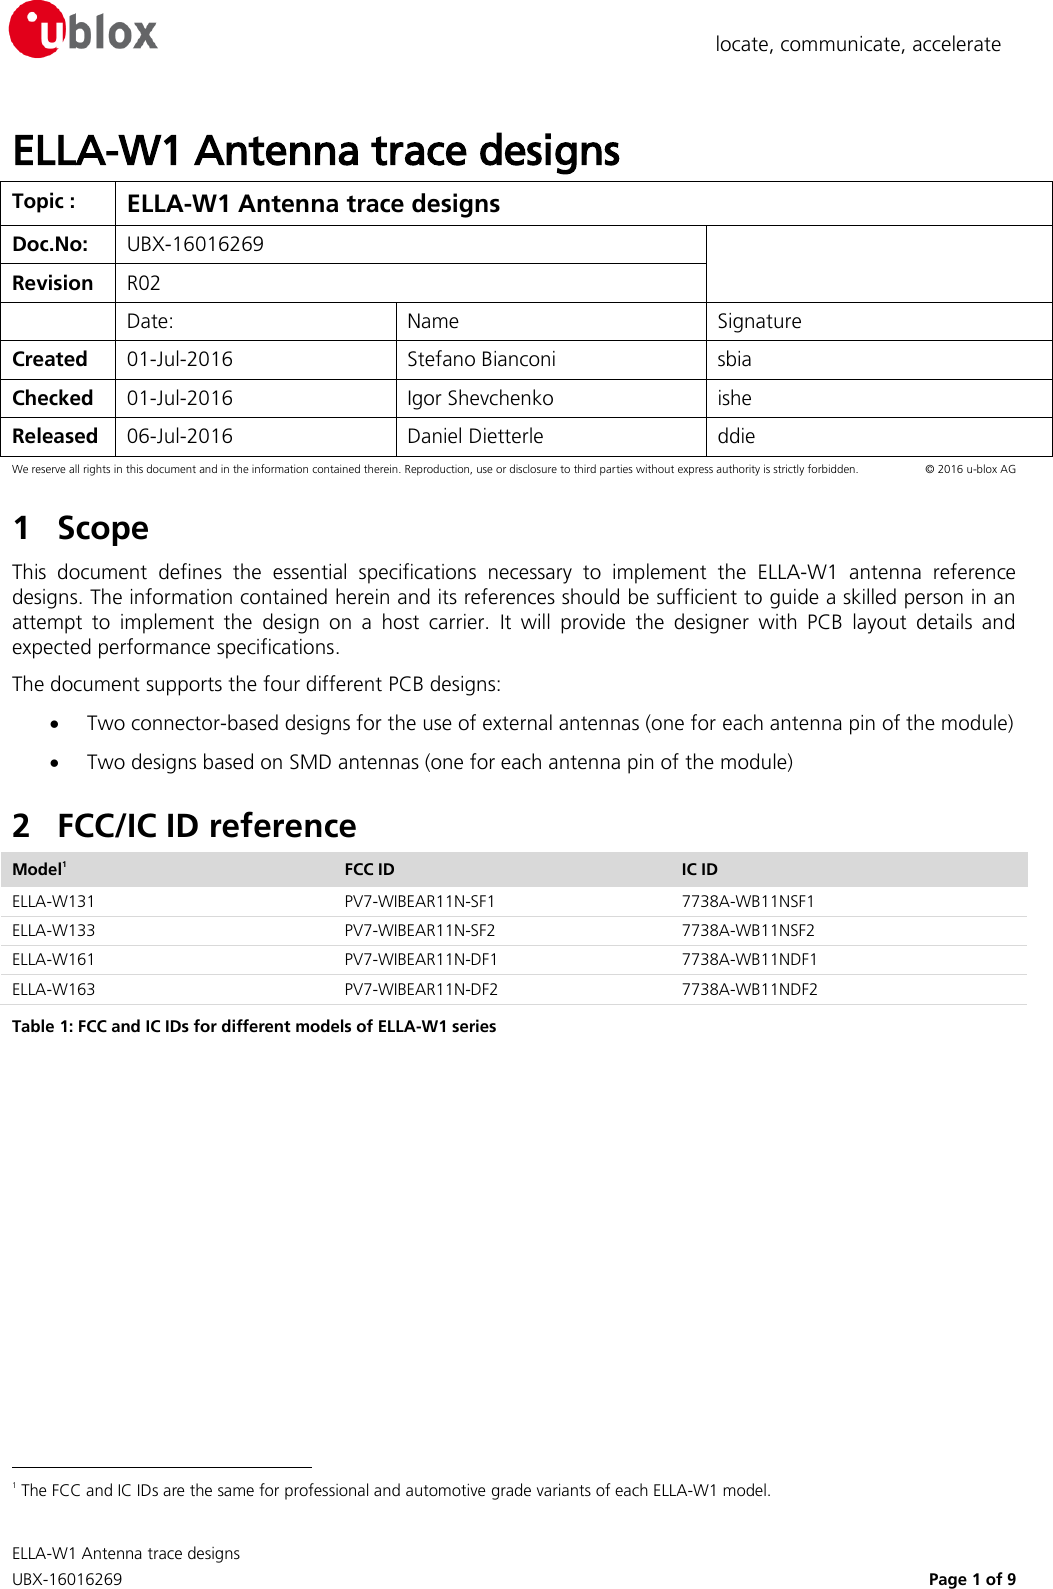  ELLA-W1 Antenna trace designs     UBX-16016269    Page 1 of 9  locate, communicate, accelerate ELLA-W1 Antenna trace designs Topic : ELLA-W1 Antenna trace designs Doc.No: UBX-16016269  Revision R02  Date:  Name Signature Created 01-Jul-2016 Stefano Bianconi sbia Checked 01-Jul-2016 Igor Shevchenko ishe Released 06-Jul-2016 Daniel Dietterle ddie We reserve all rights in this document and in the information contained therein. Reproduction, use or disclosure to third parties without express authority is strictly forbidden.   © 2016 u-blox AG 1 Scope This  document  defines  the  essential  specifications  necessary  to  implement  the  ELLA-W1  antenna  reference designs. The information contained herein and its references should be sufficient to guide a skilled person in an attempt  to  implement  the  design  on  a  host  carrier.  It  will  provide  the  designer  with  PCB  layout  details  and expected performance specifications. The document supports the four different PCB designs:   Two connector-based designs for the use of external antennas (one for each antenna pin of the module)   Two designs based on SMD antennas (one for each antenna pin of the module) 2 FCC/IC ID reference Model1 FCC ID IC ID ELLA-W131 PV7-WIBEAR11N-SF1 7738A-WB11NSF1 ELLA-W133 PV7-WIBEAR11N-SF2 7738A-WB11NSF2 ELLA-W161 PV7-WIBEAR11N-DF1 7738A-WB11NDF1 ELLA-W163 PV7-WIBEAR11N-DF2 7738A-WB11NDF2 Table 1: FCC and IC IDs for different models of ELLA-W1 series                                                       1 The FCC and IC IDs are the same for professional and automotive grade variants of each ELLA-W1 model. 